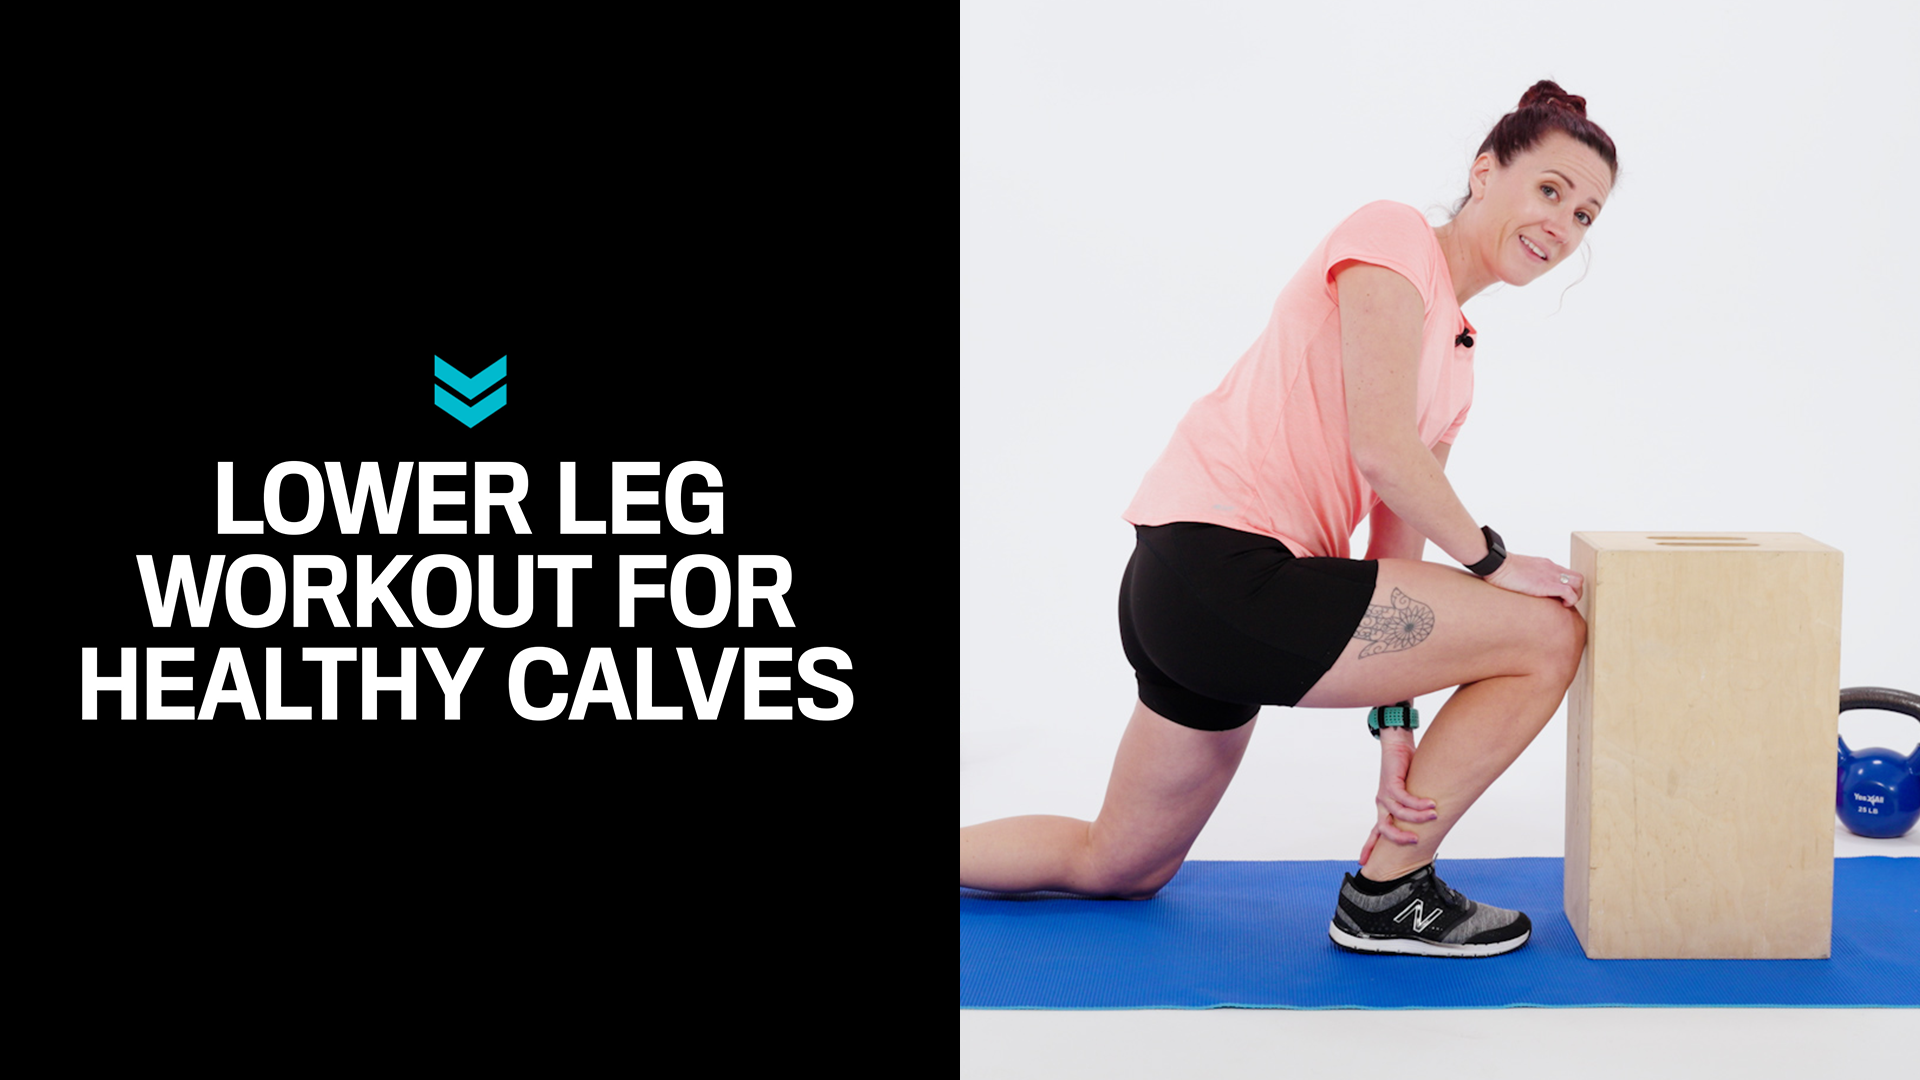 Cardio Legs Workout: 8 Exercises for Muscle Growth and Endurance